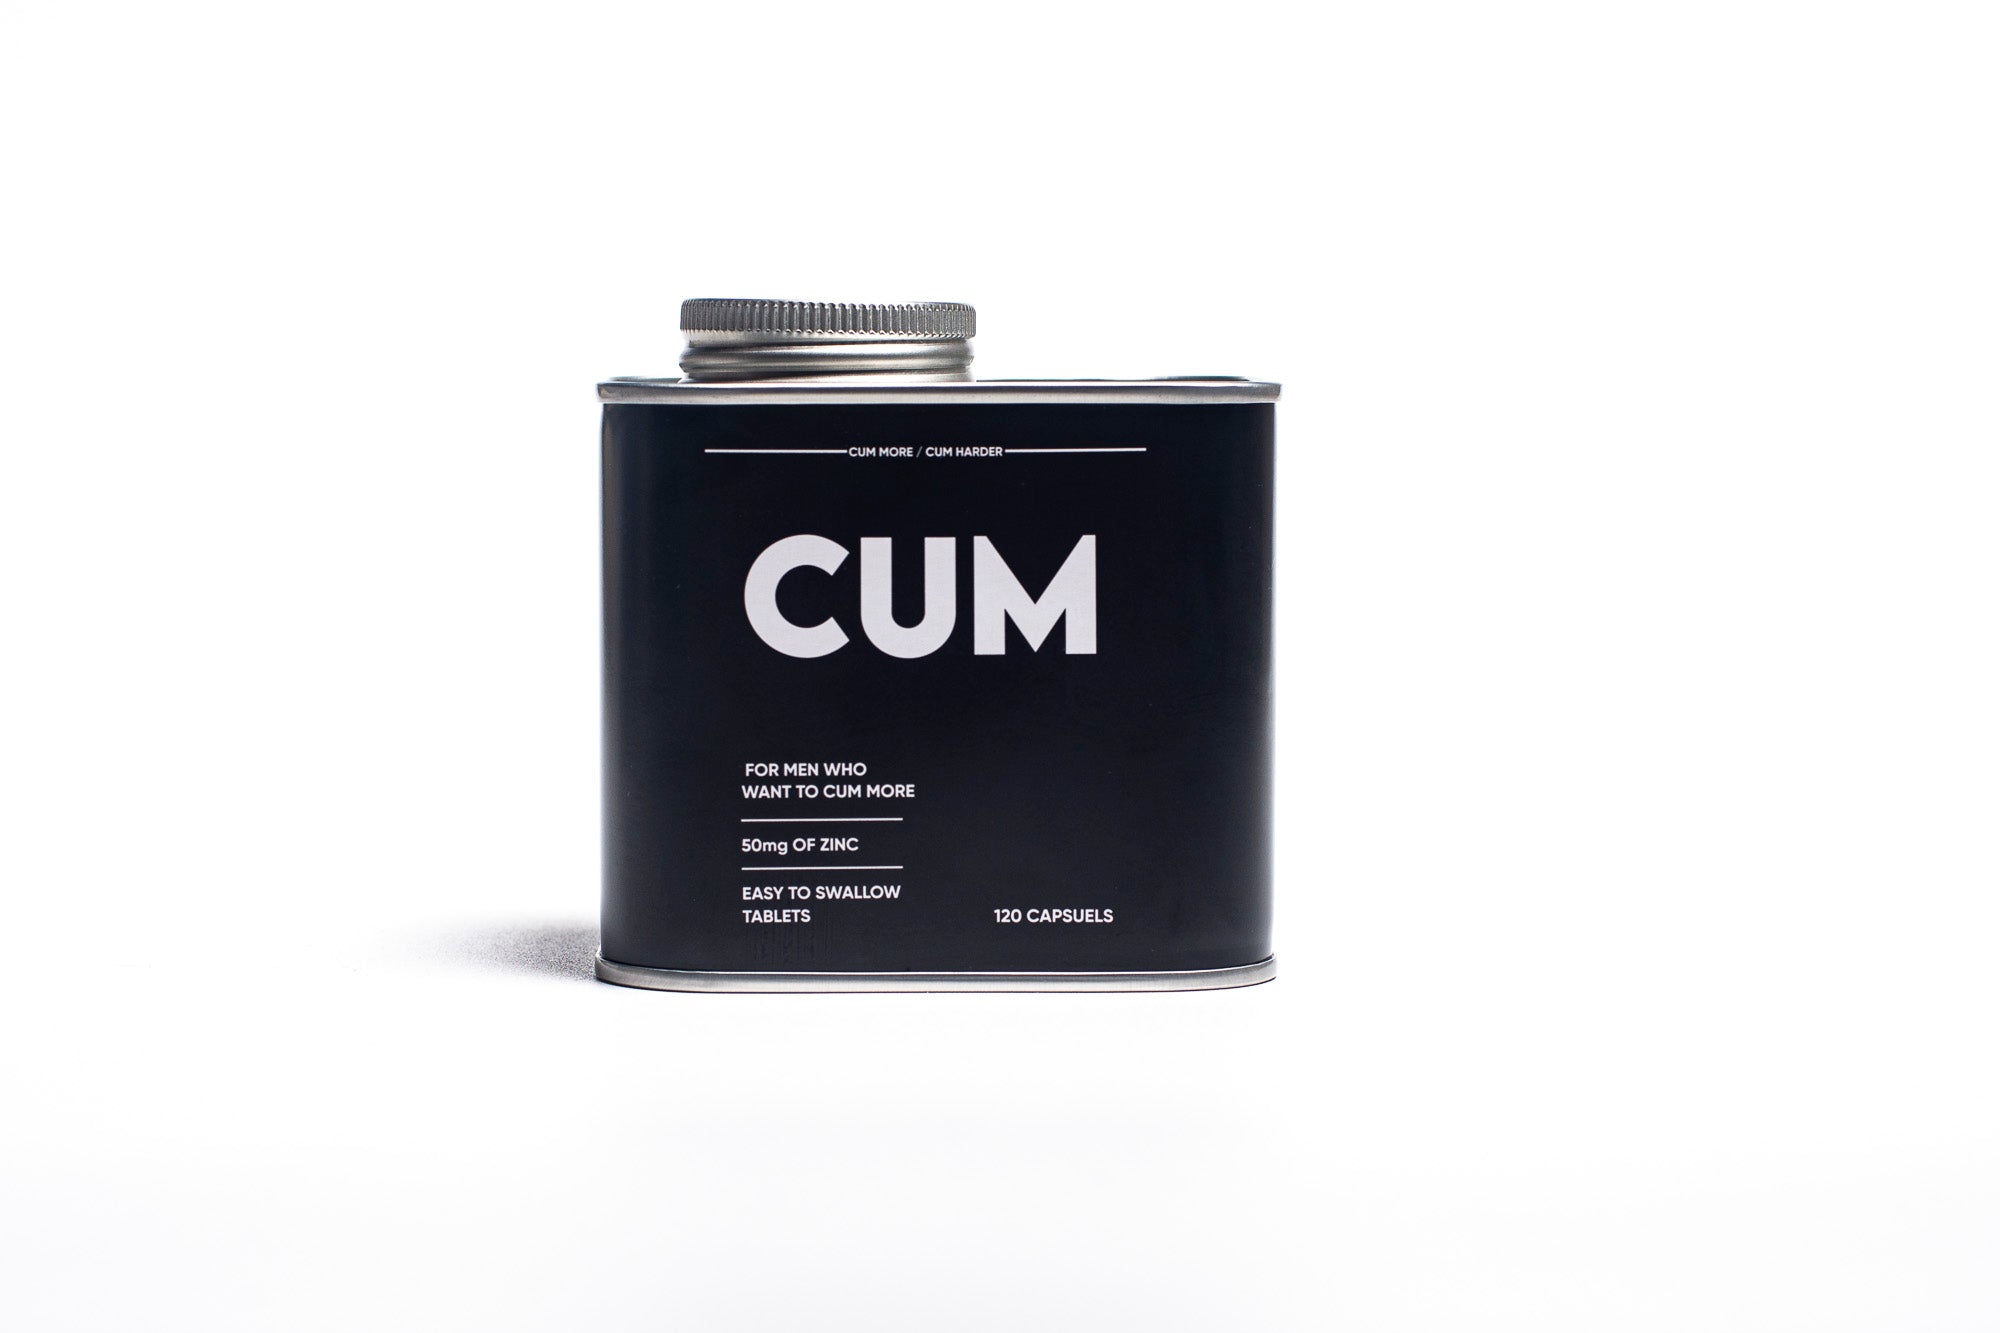 C*M - have a more intense orgasm and cum harder (Subscribe and save 15%) (2 months supply)